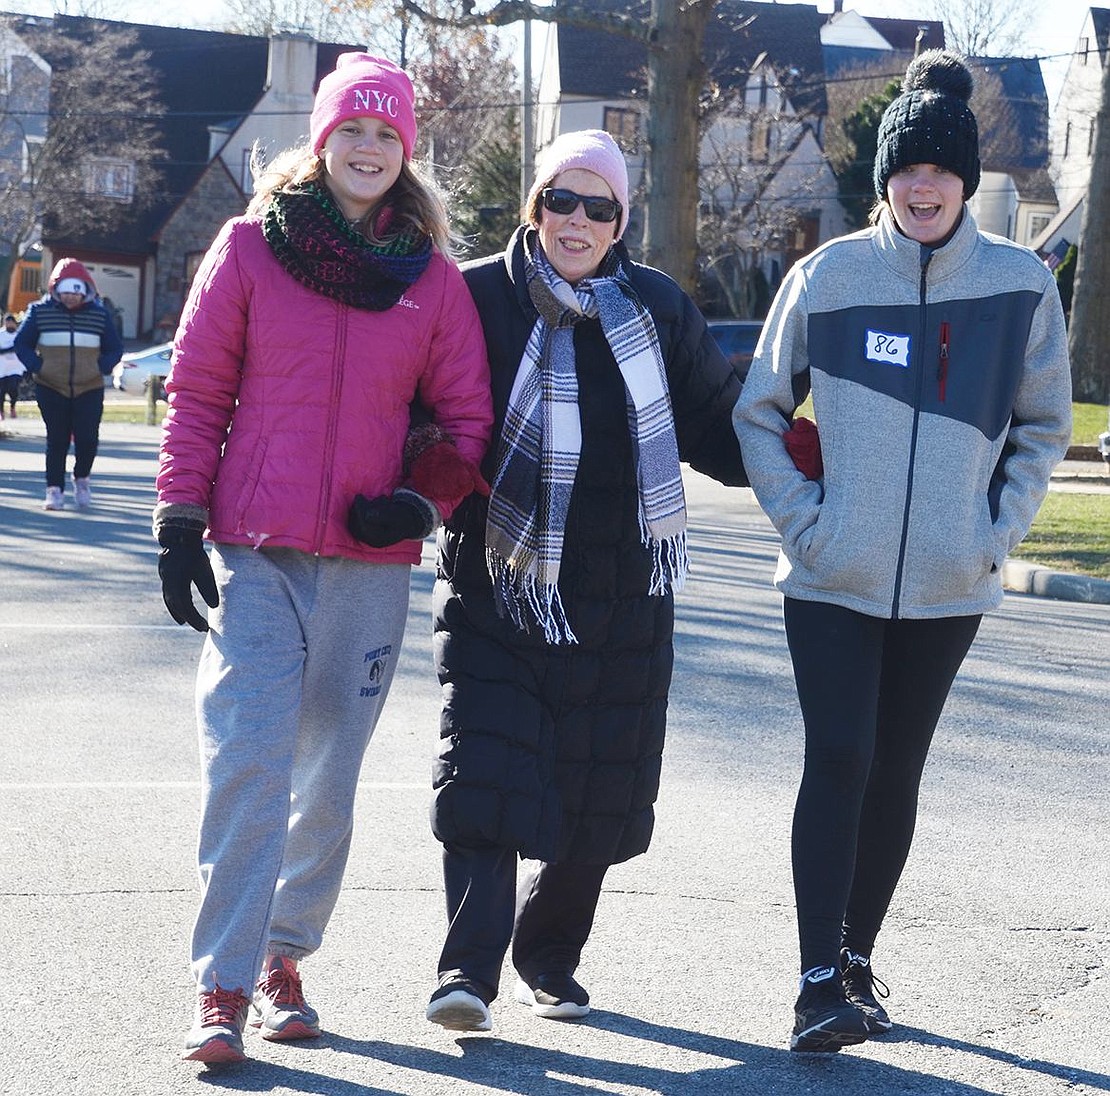 Terry Heller, 82, of Port Chester, walks the course with her granddaughters Julie (left) and Megan Tiedemann of Rye. Their father Art is a science teacher at Port Chester Middle School.